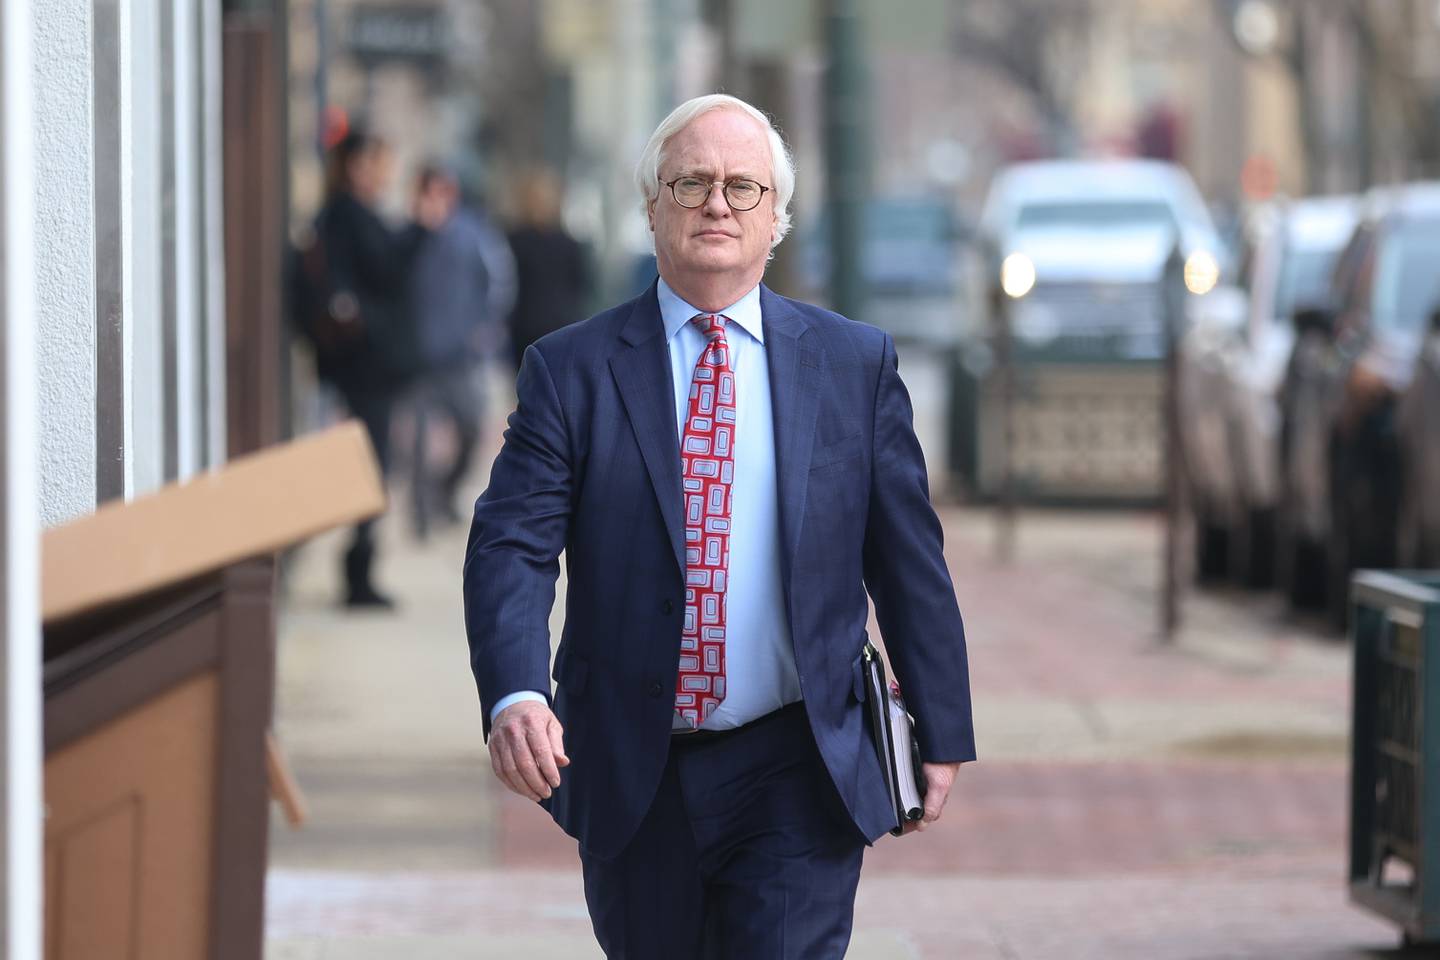 John Partelow, the lawyer representing Joliet Township Karl Ferrell, arrives to theWill County Annex Building. Thursday, Mar. 17, 2022, in Joliet.